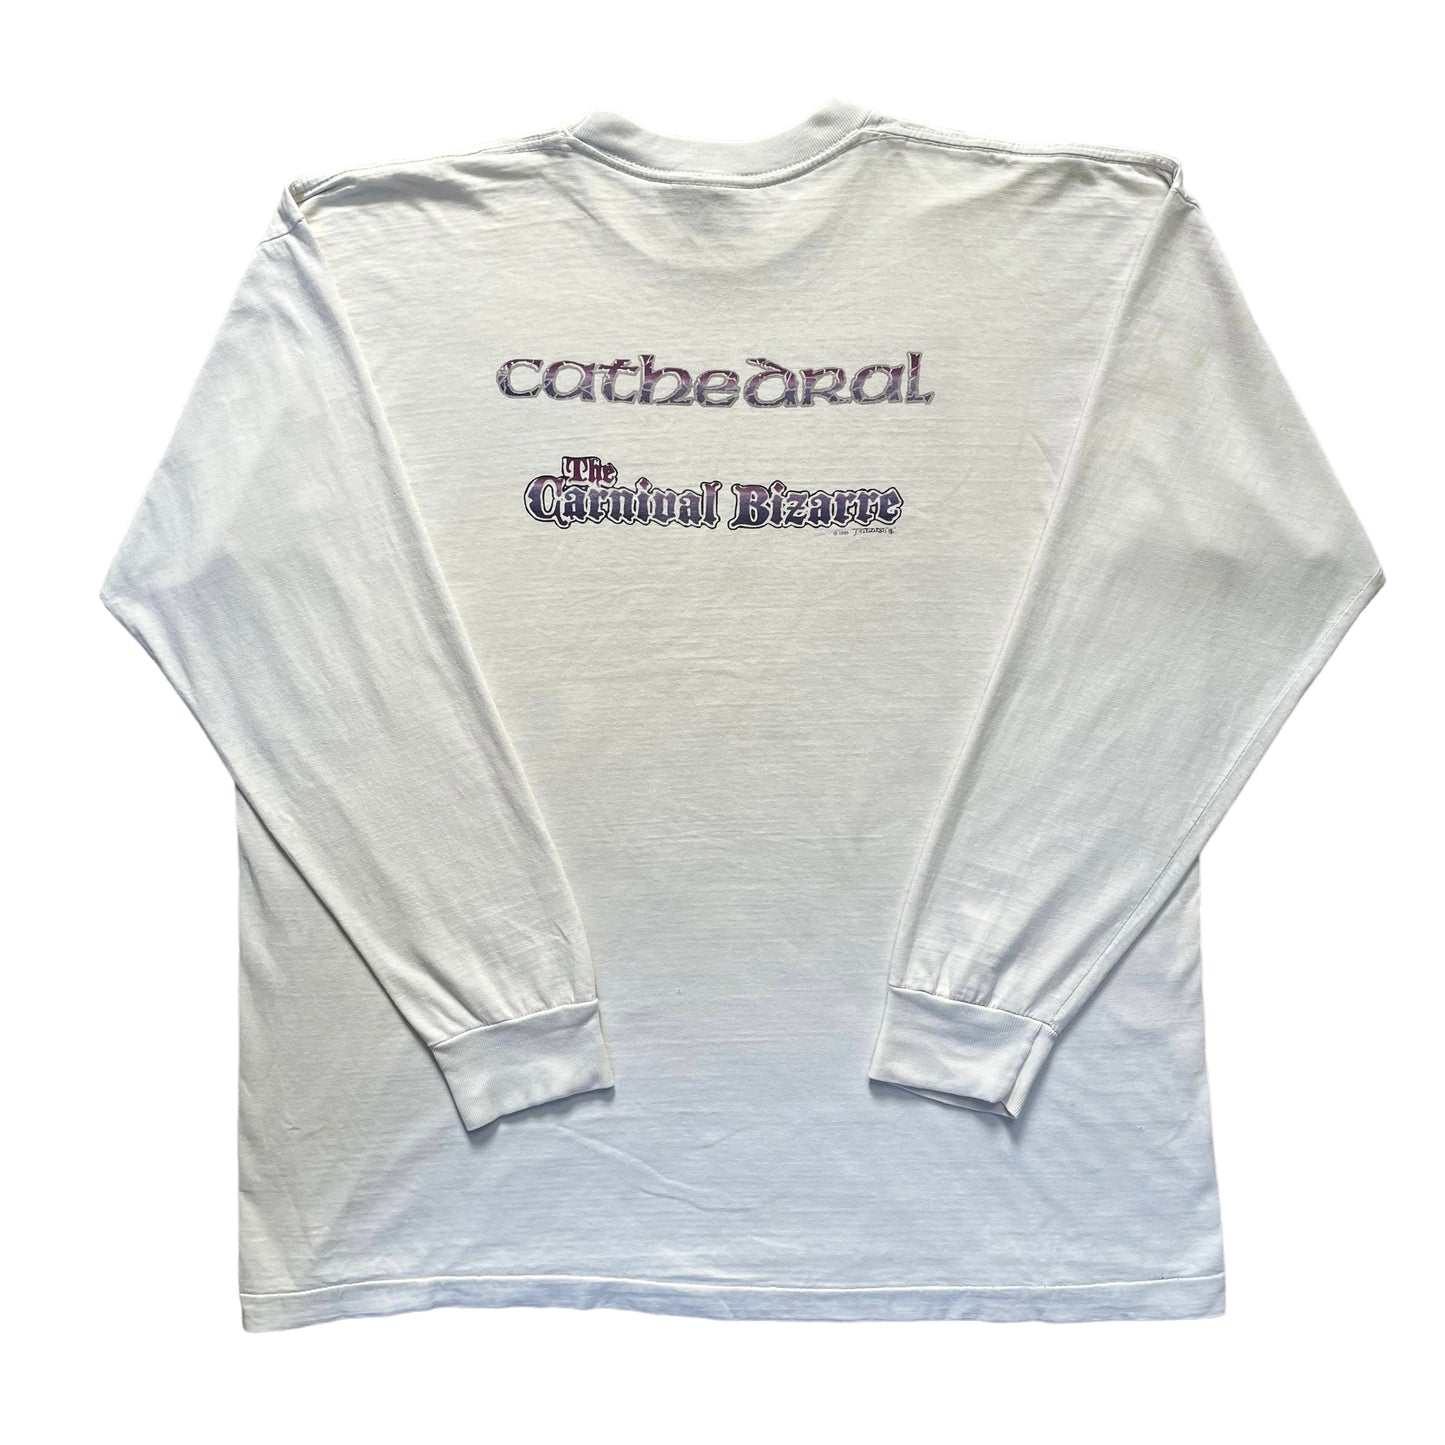 1995 Cathedral ‘The Carnival Bizarre’ (XL+)